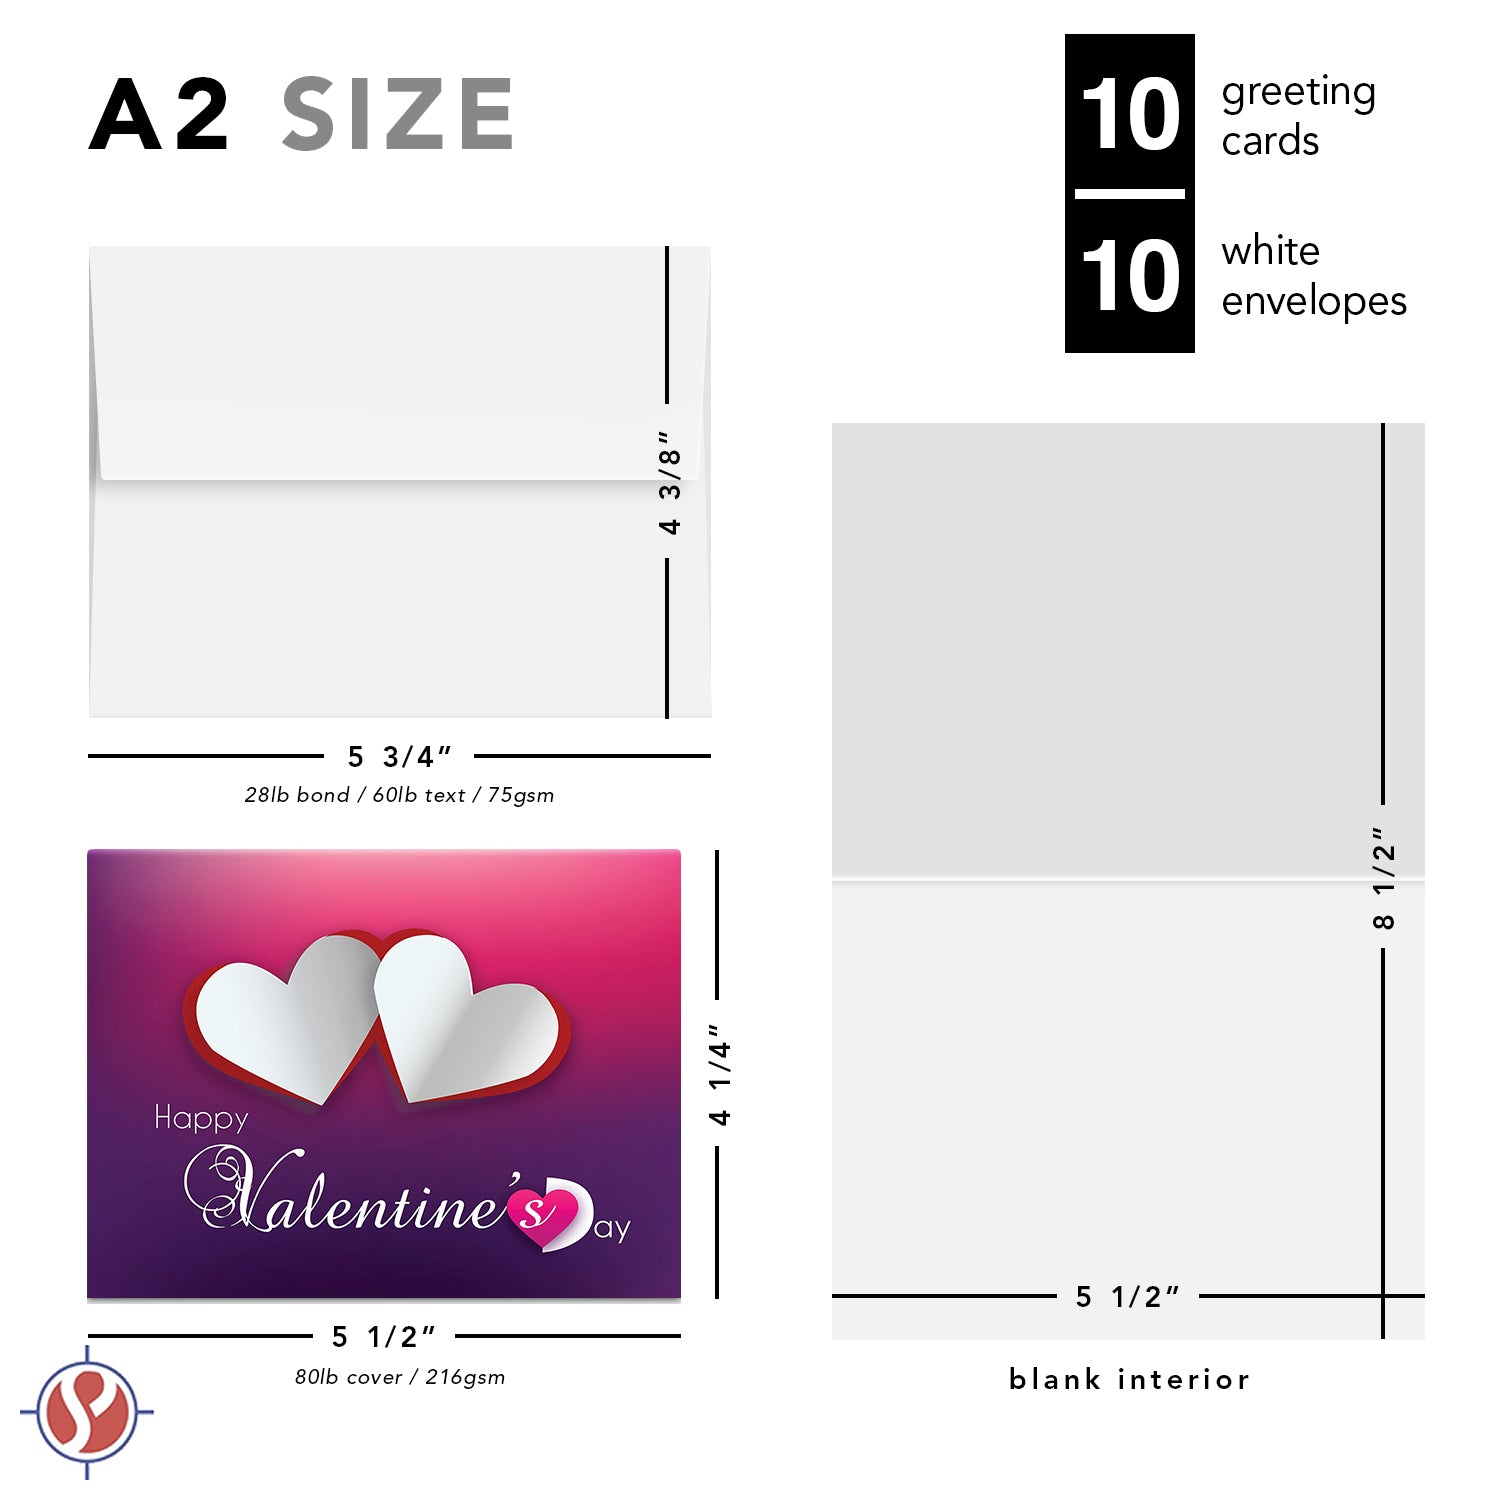 Valentine's Day Greeting Cards - 10 Pack Premium Quality 4.25x5.5 inches Heart Design and Typography Cards with Envelopes